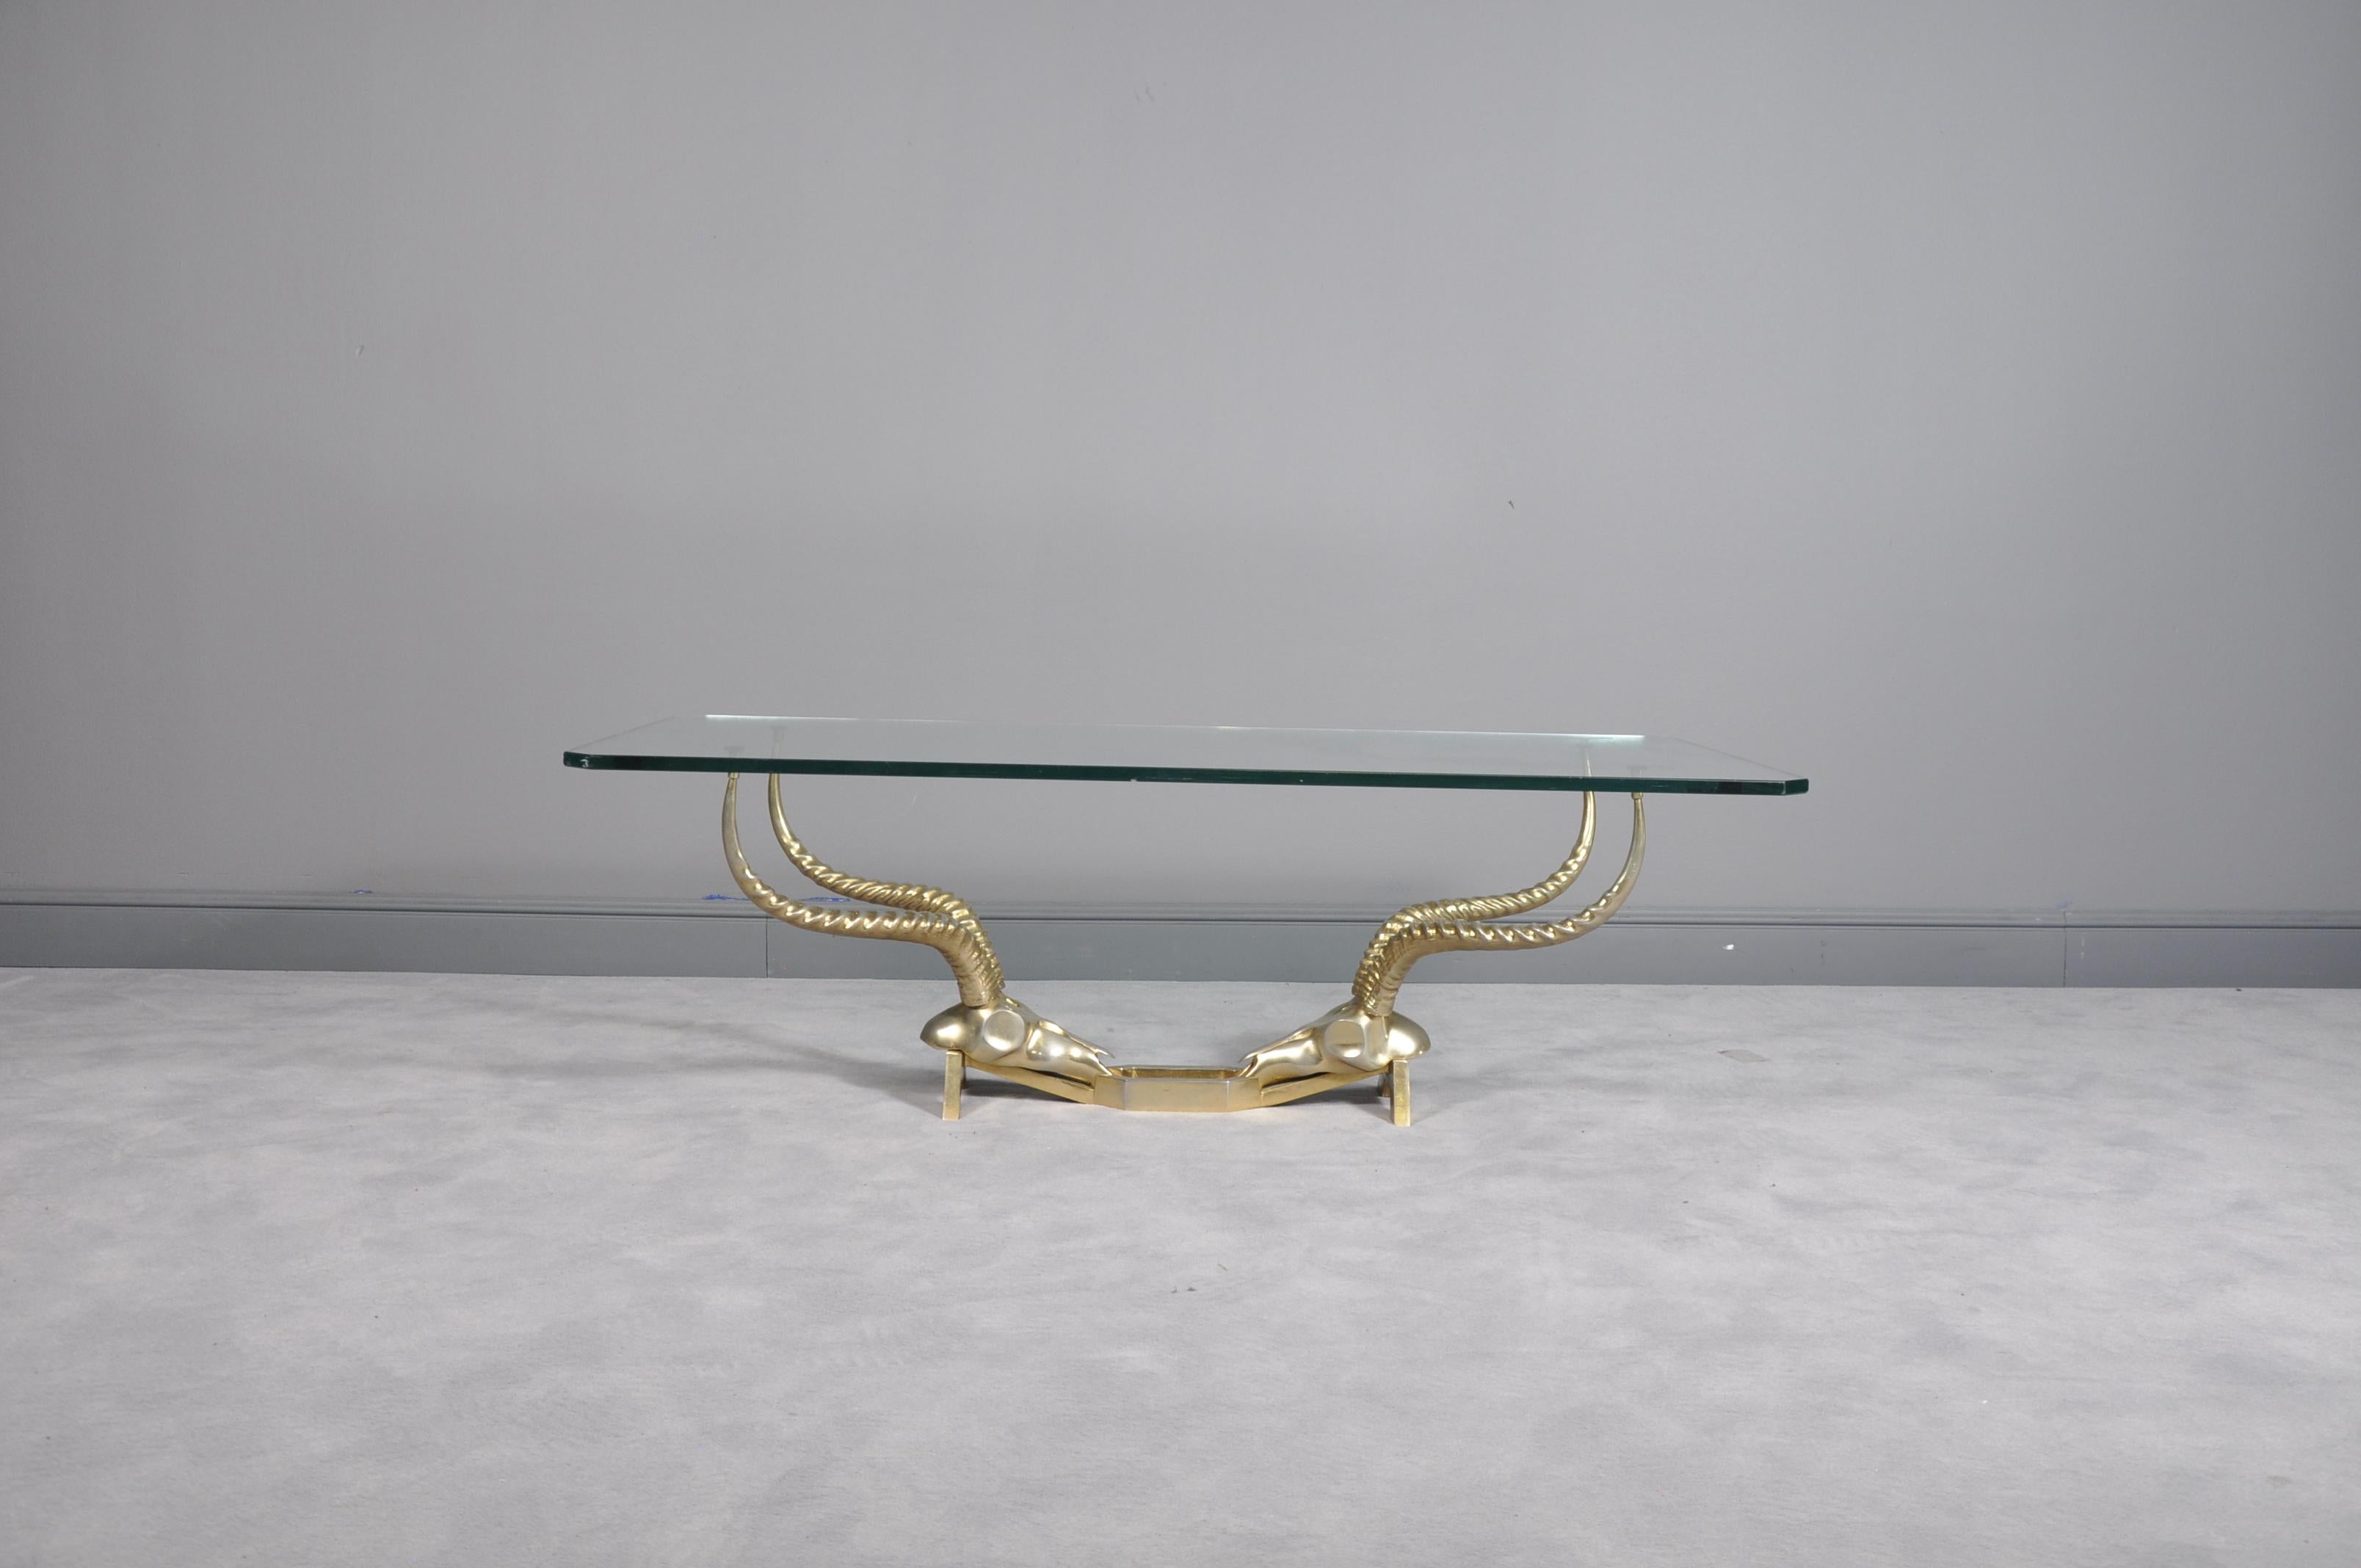 This coffee table features a solid sculpted brass base fashioned as two antelope skulls each with a stunning pair of horns.

Measures: W 130 / D 70 / H 42 cm

It has been created by Dikran Khoubesserian and manufactured by the “Fondica